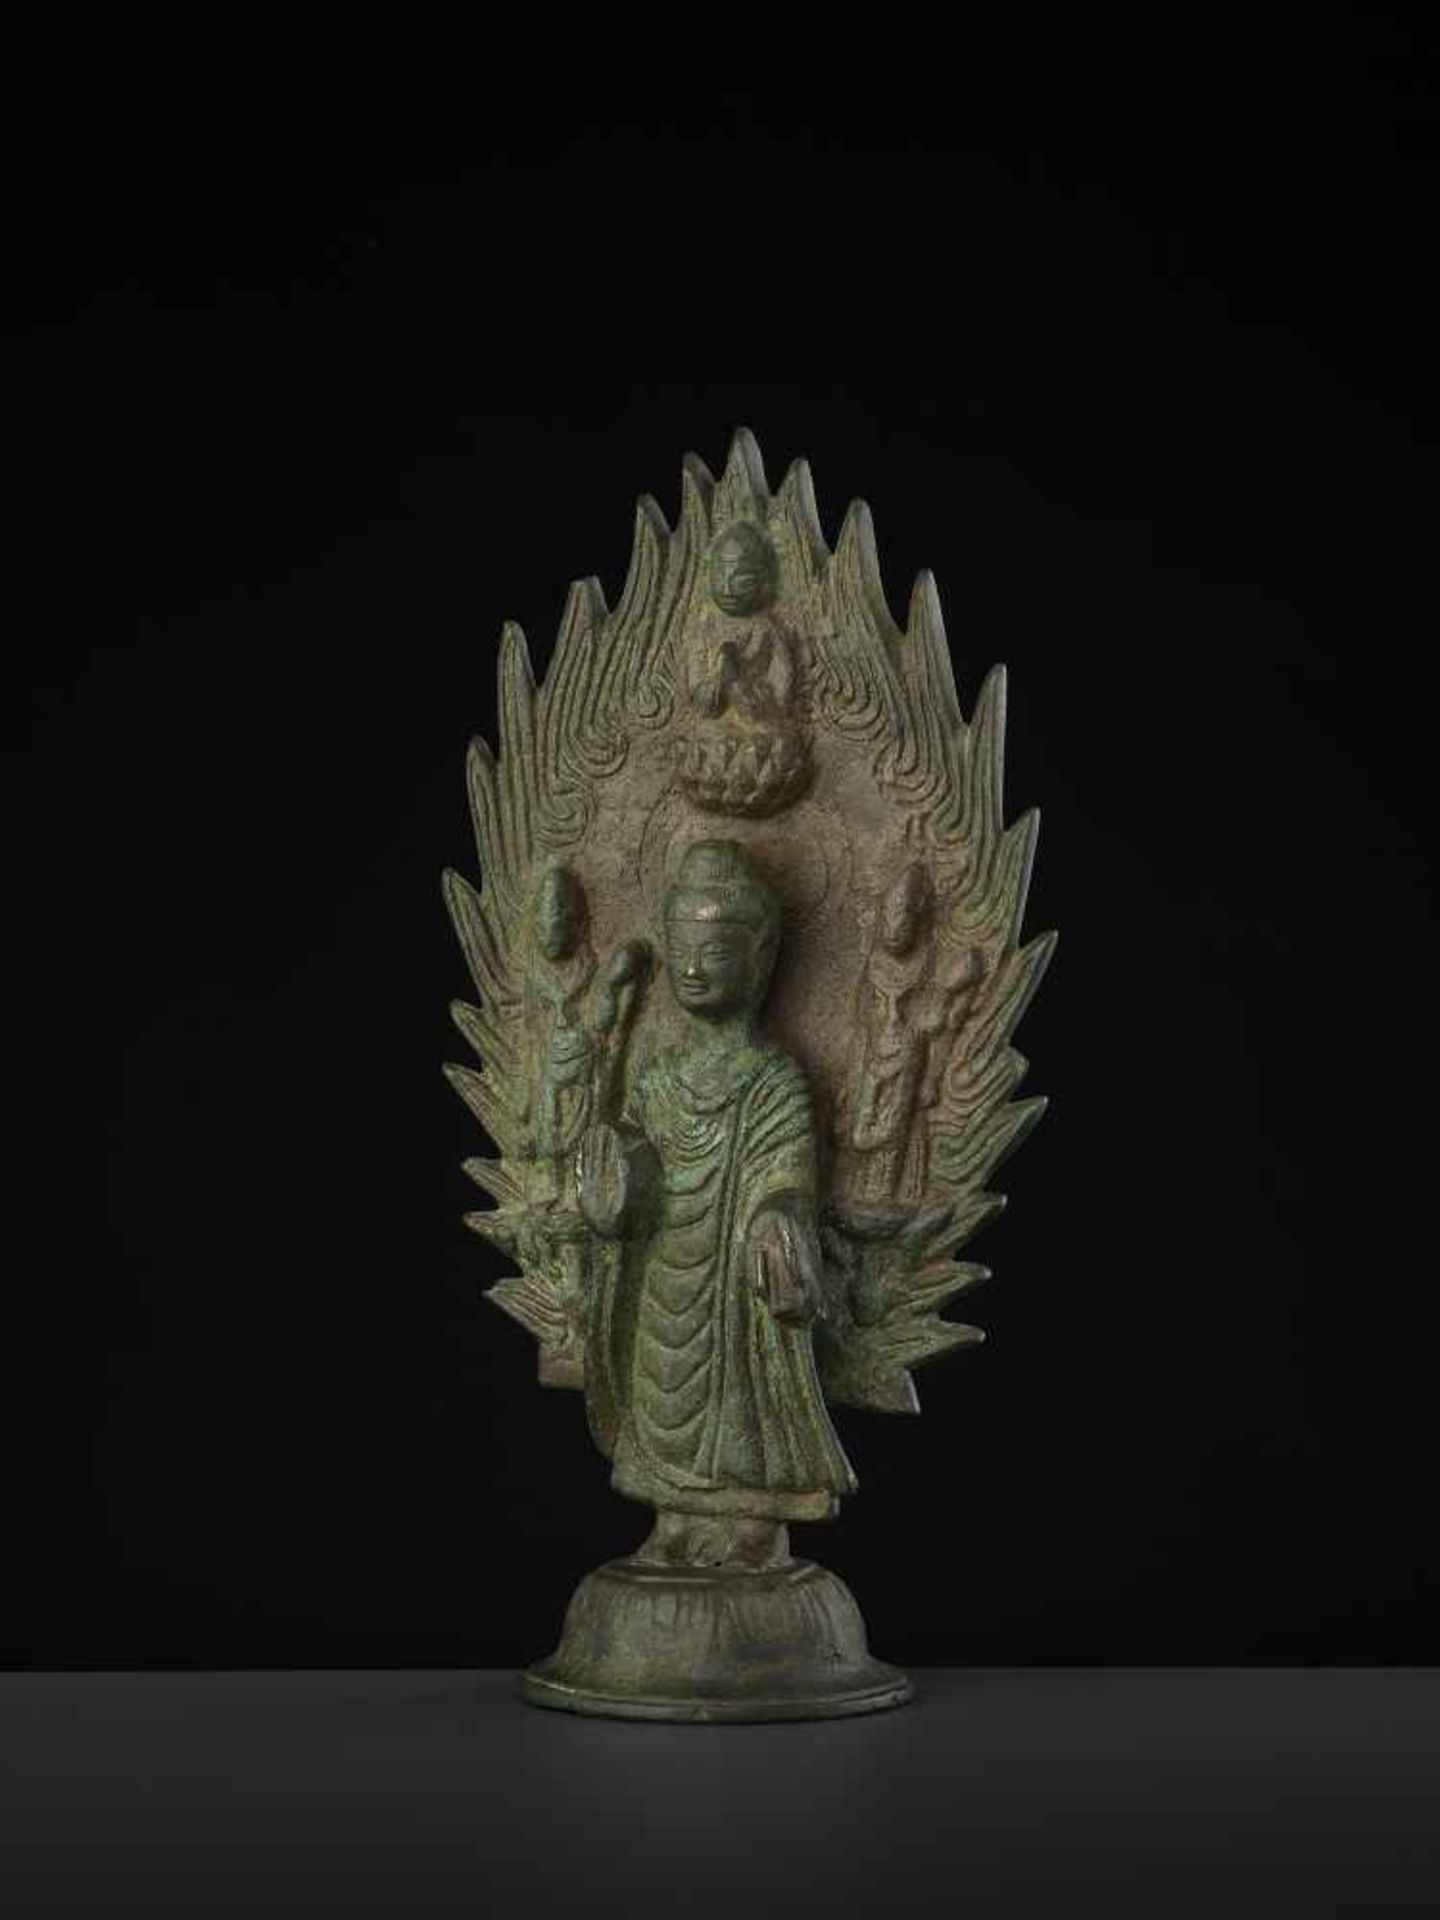 A BRONZE BUDDHA DATED 571 China, Northern Qi dynasty. Cast and incised bronze with a rich, - Image 4 of 11